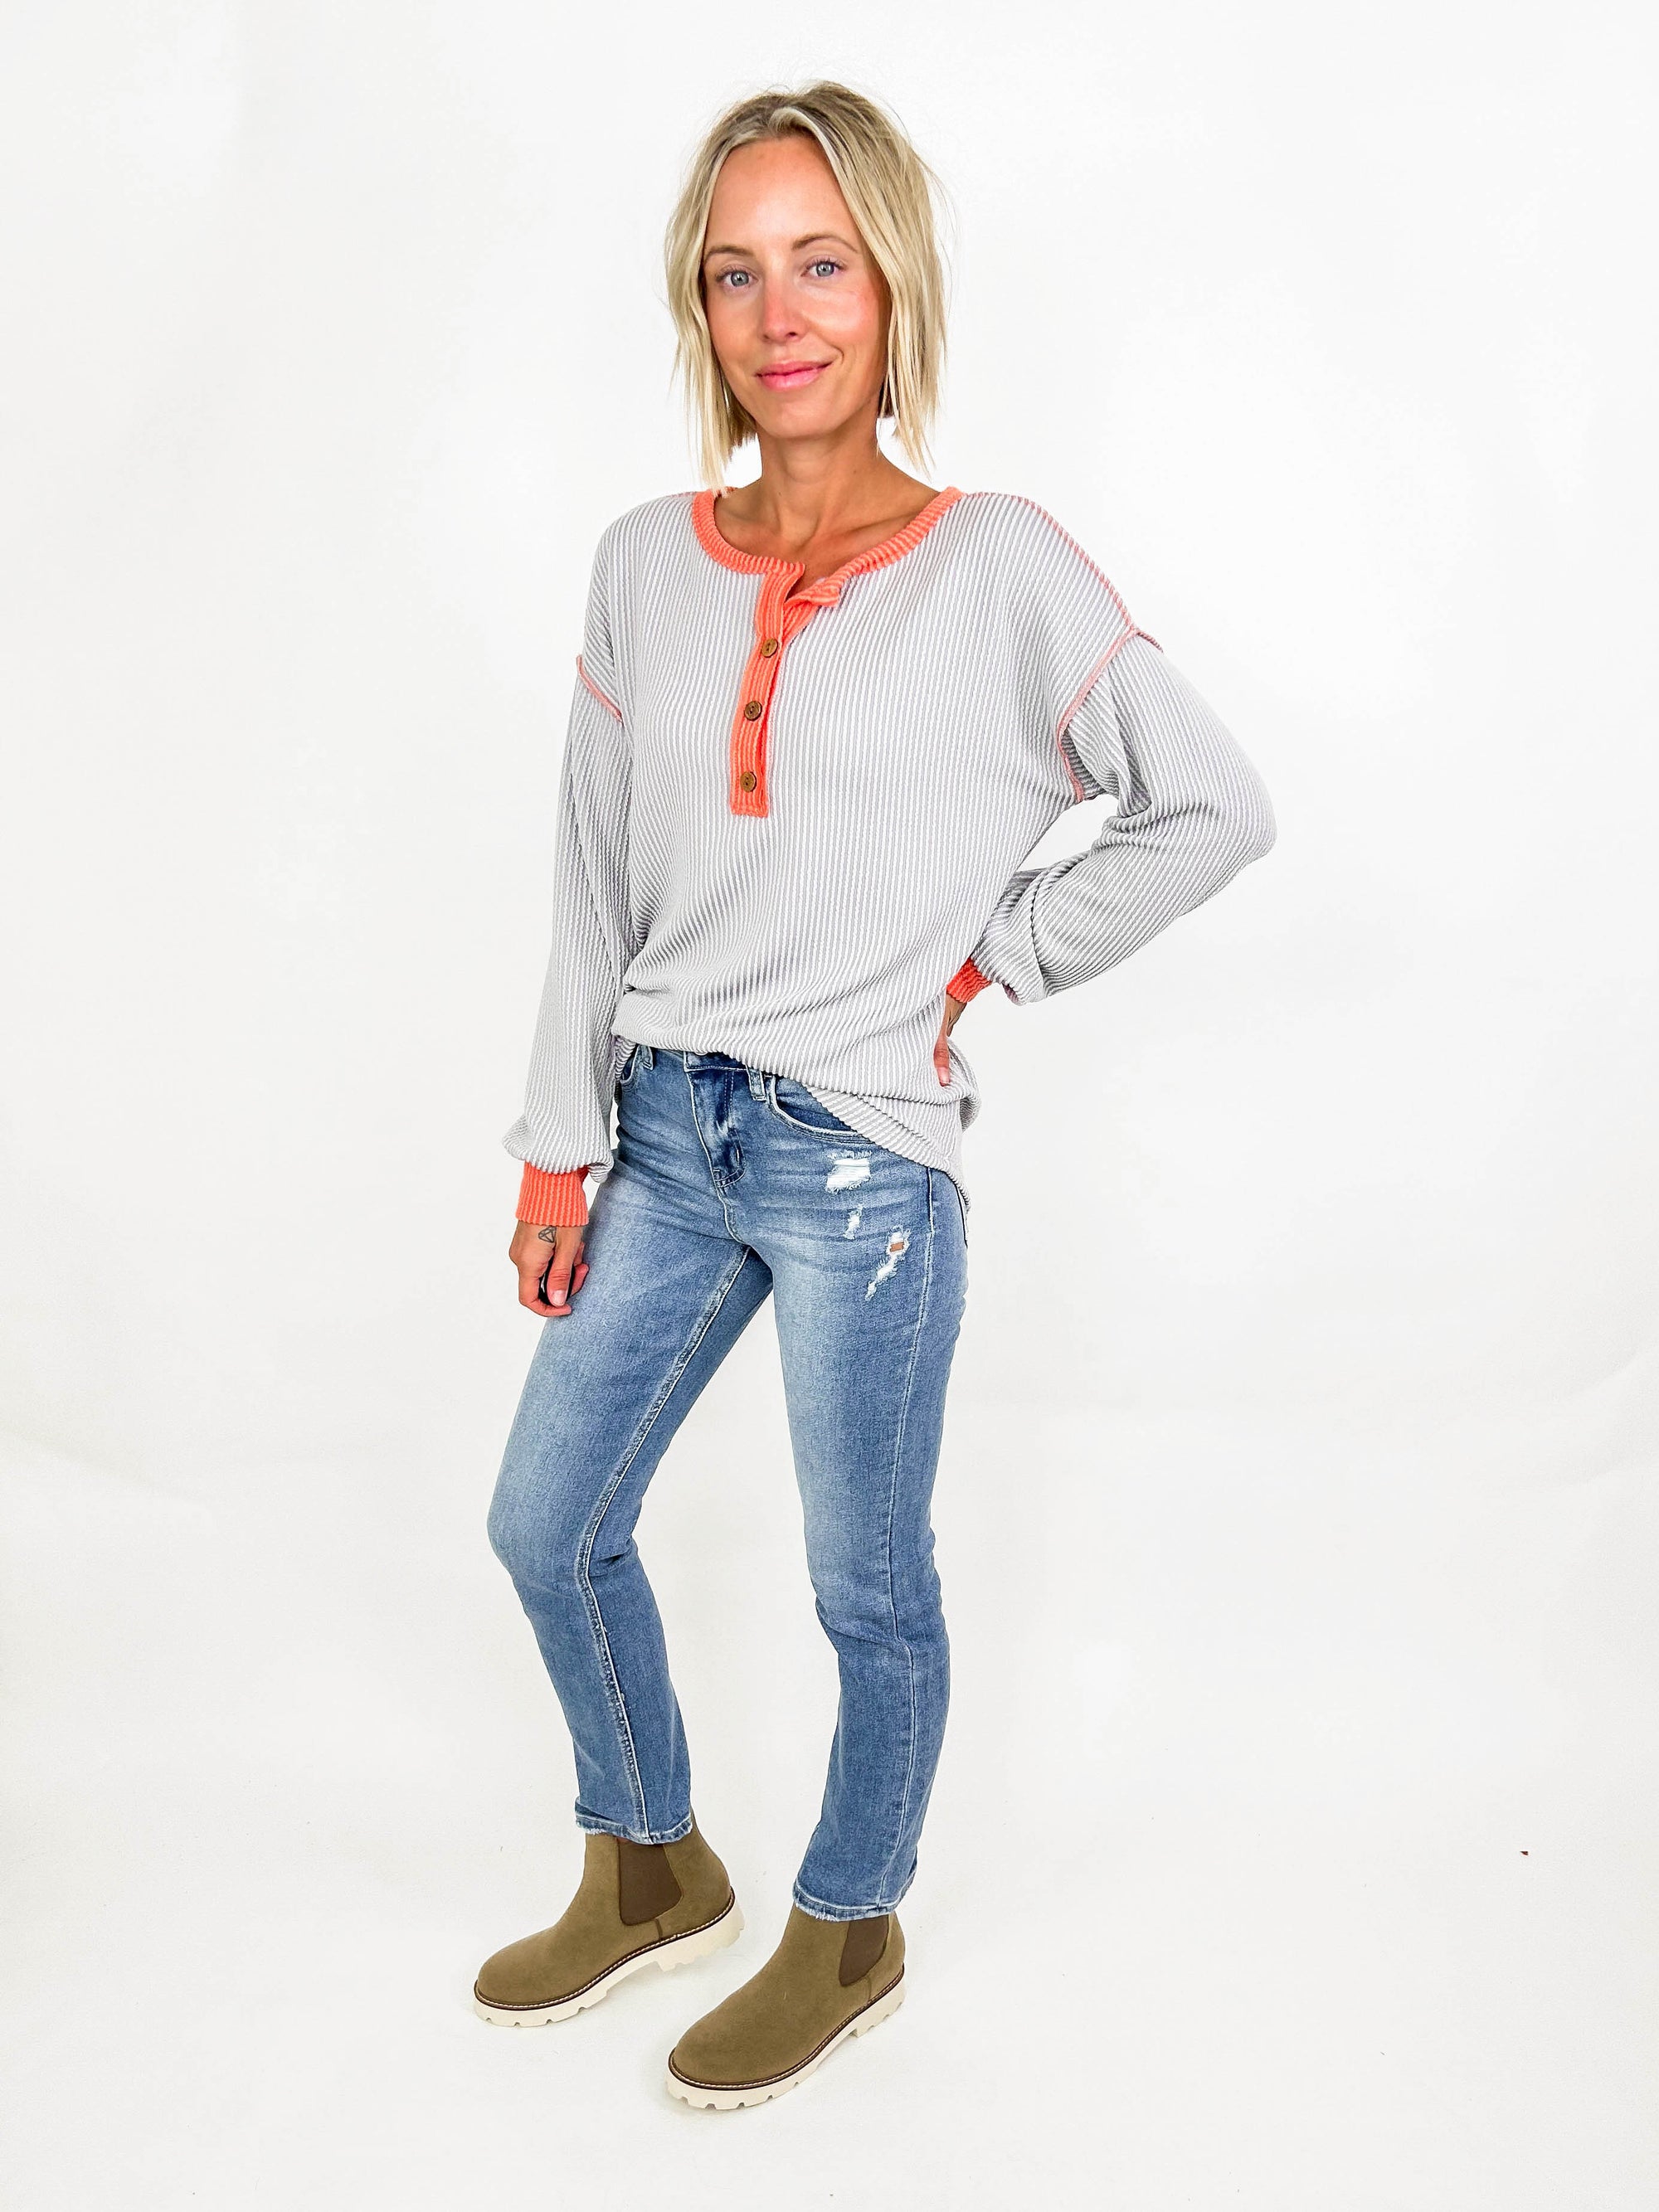 Oahu Ribbed Button Long Sleeve - GREY/CORAL